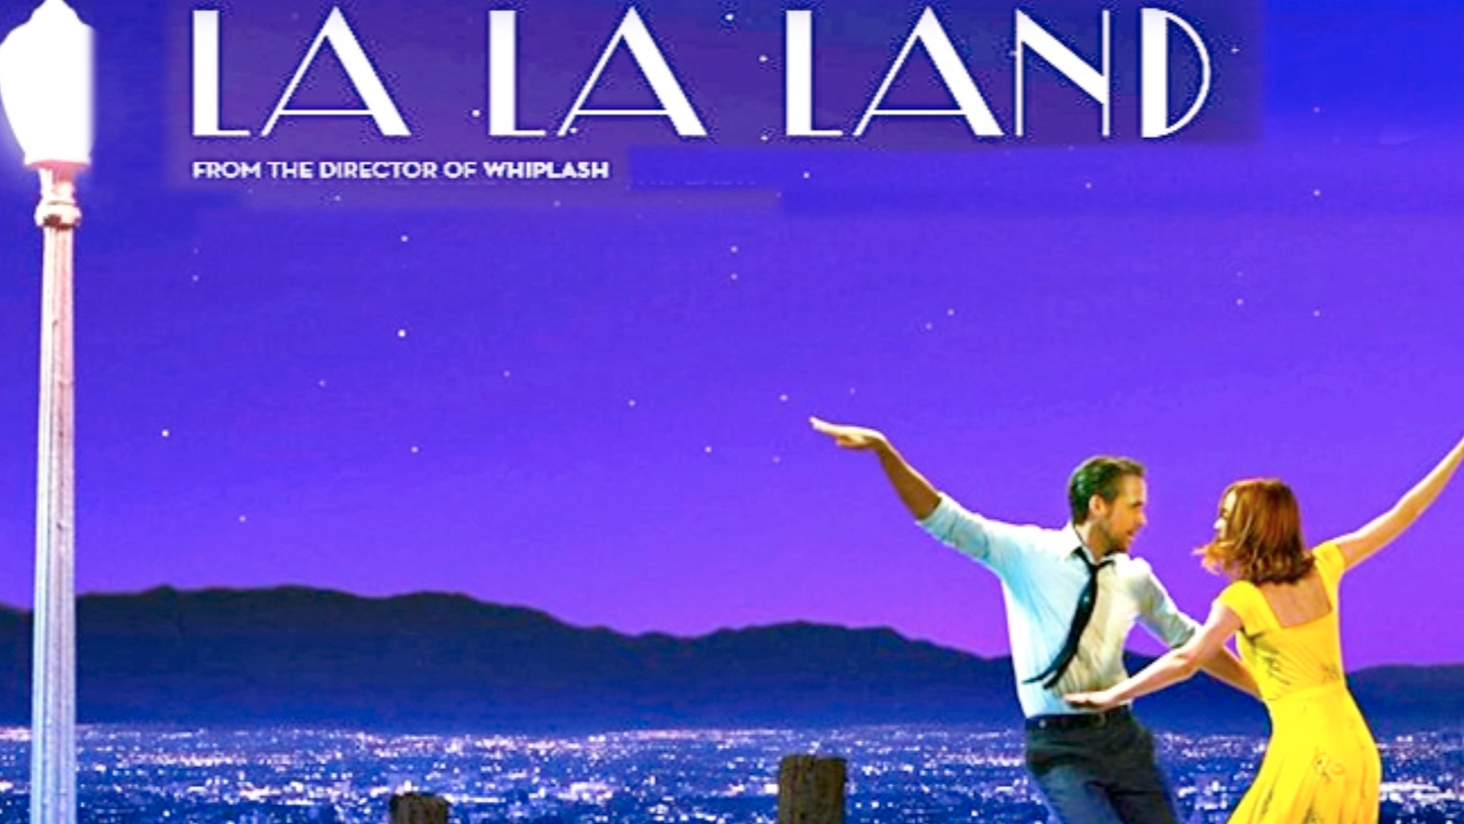 Markets are living in 'Lalaland' 